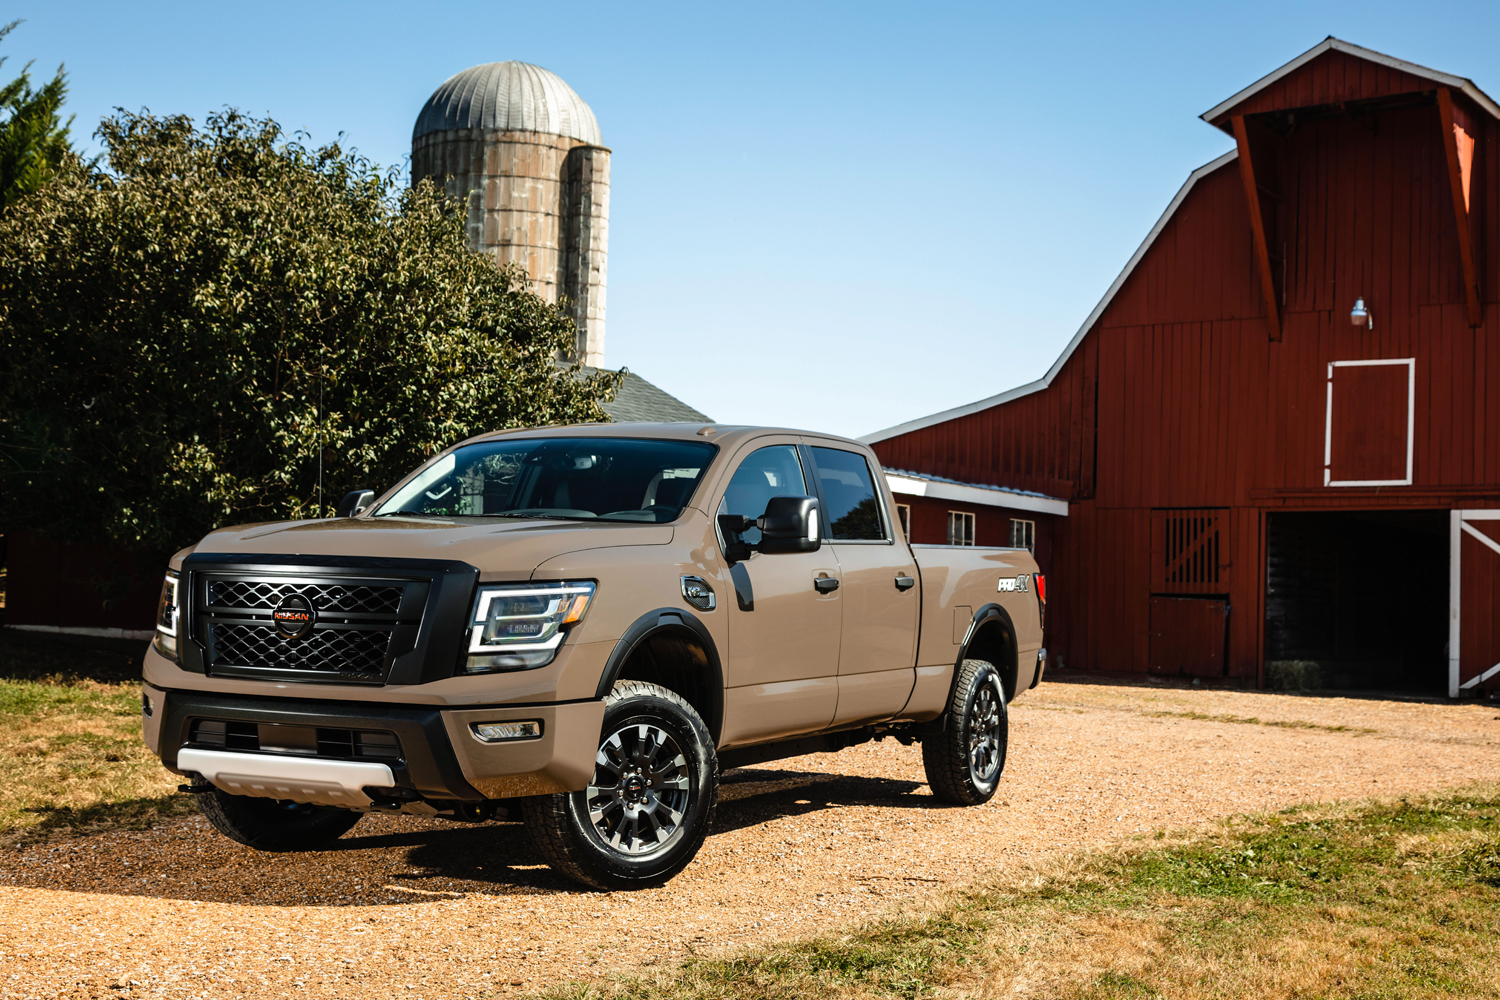 2020 nissan titan xd trim levels pricing and tech announced 1